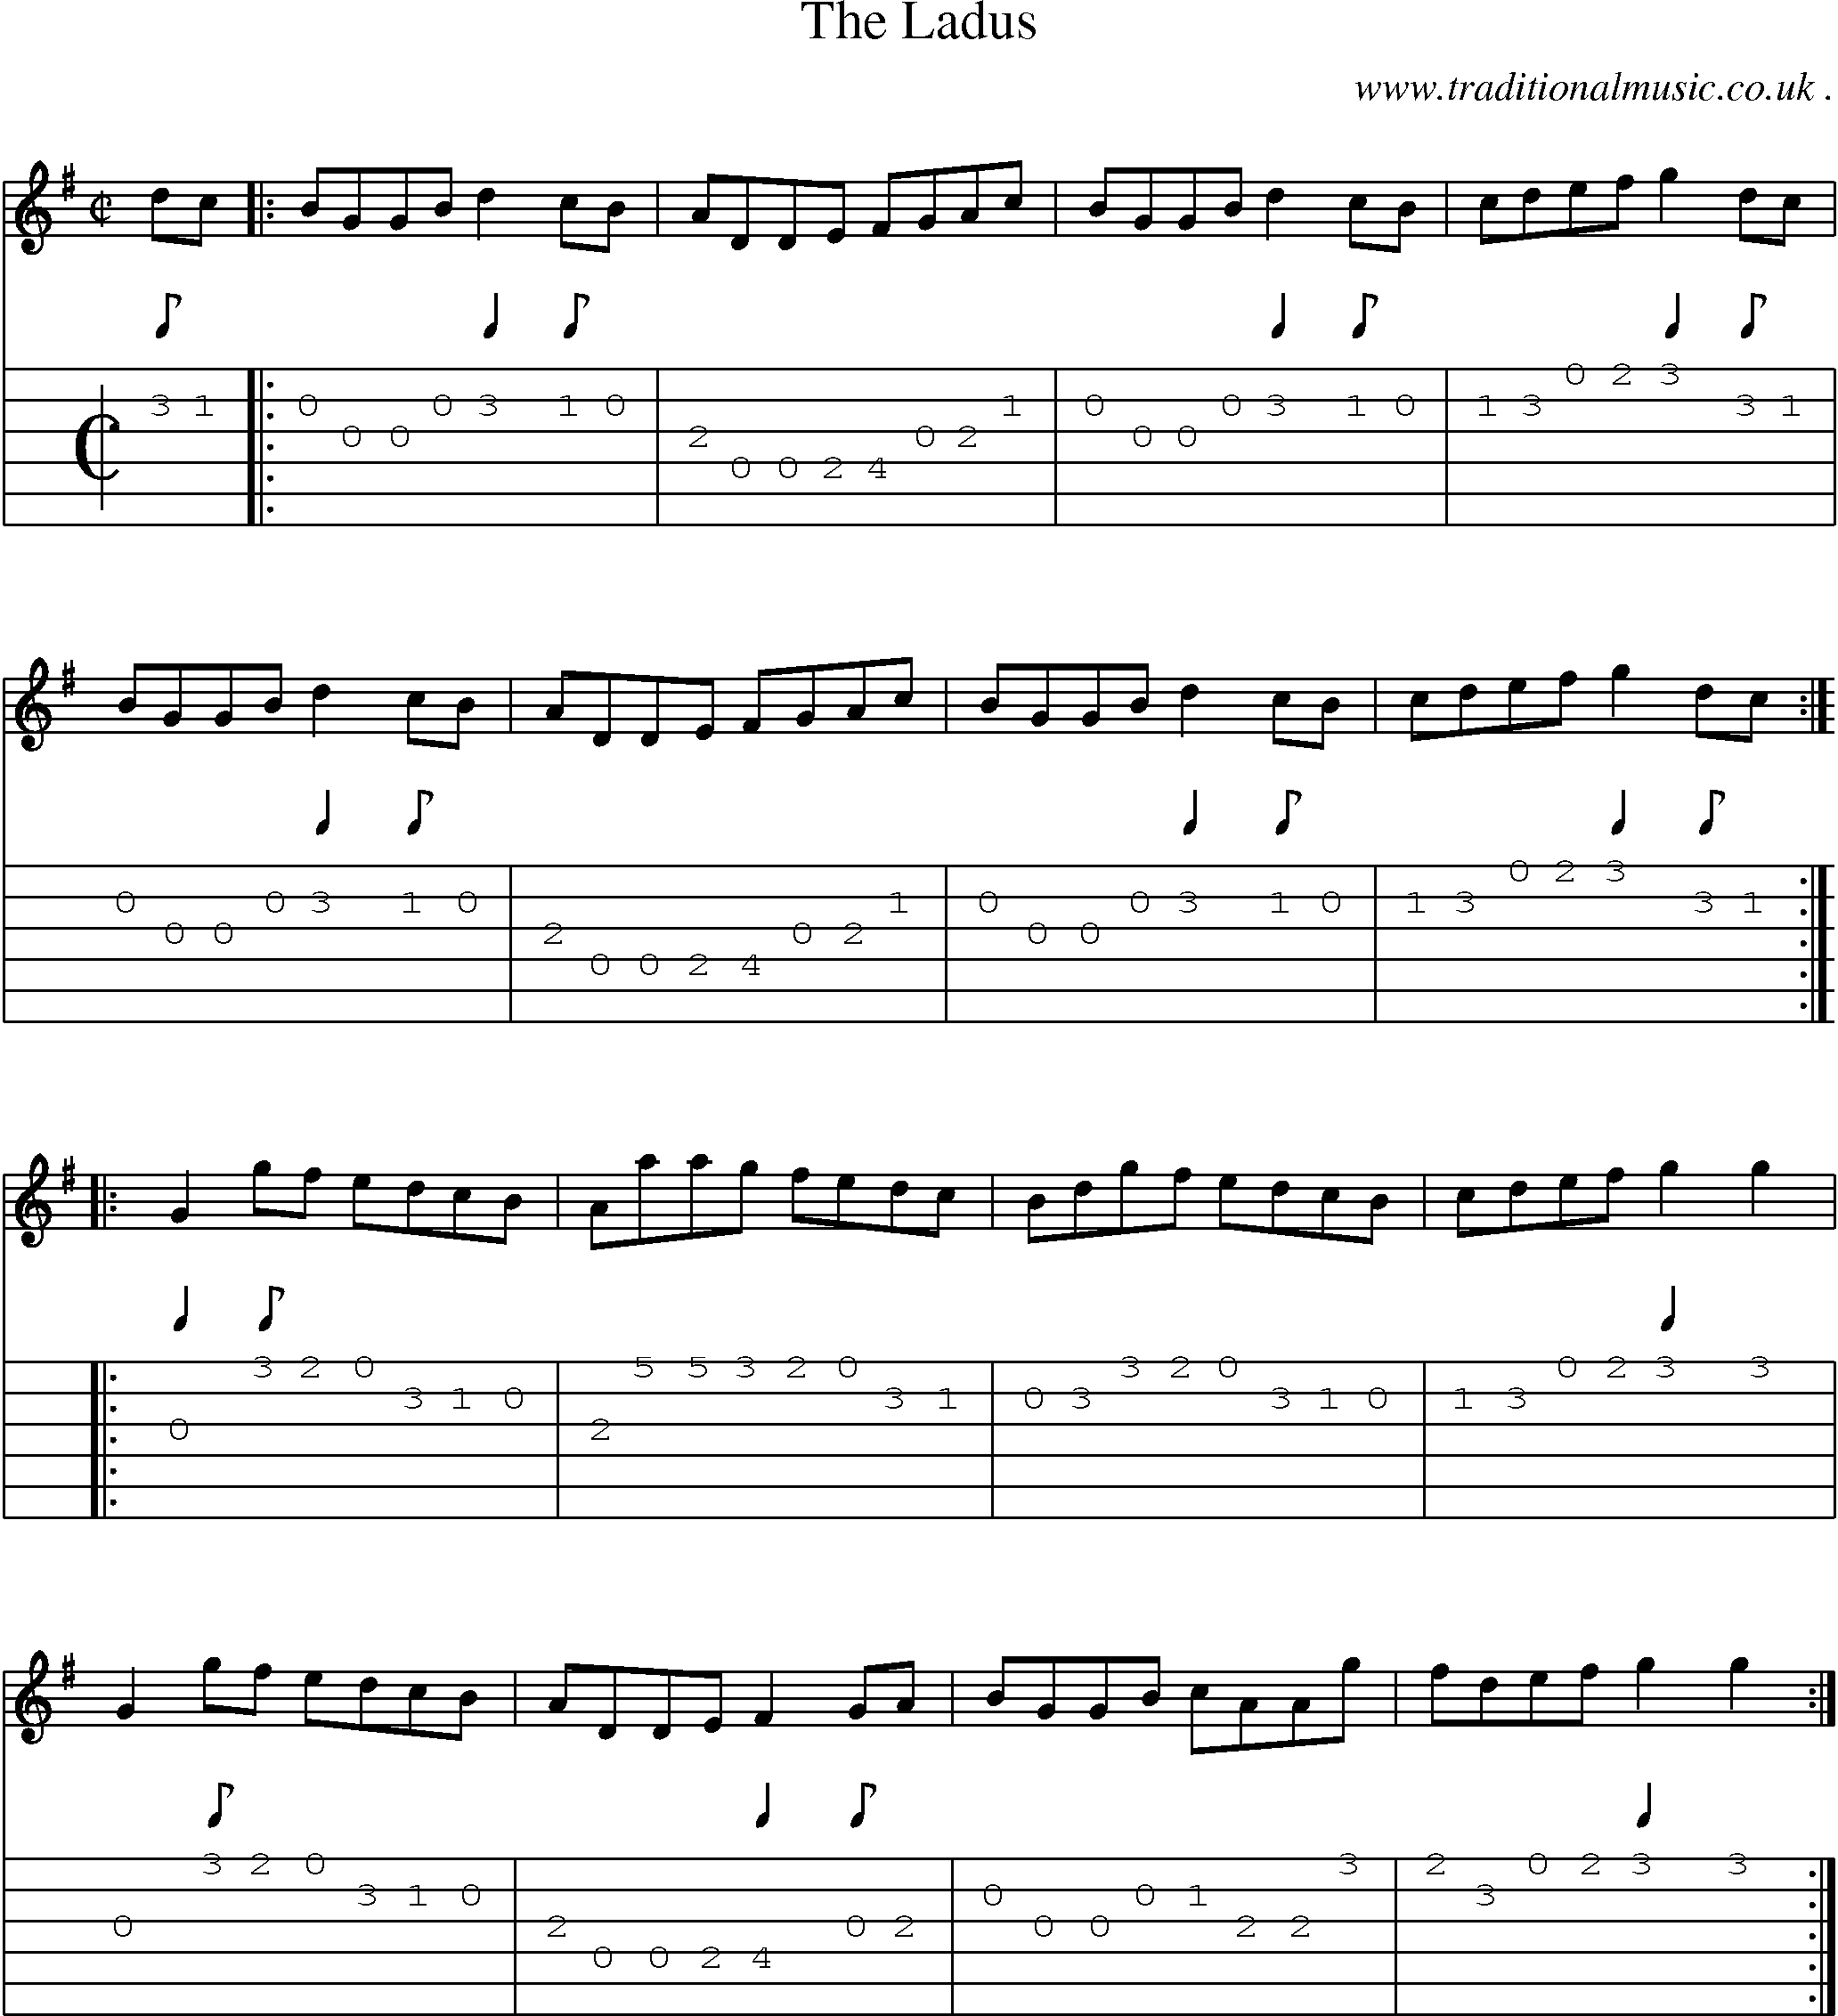 Sheet-Music and Guitar Tabs for The Ladus